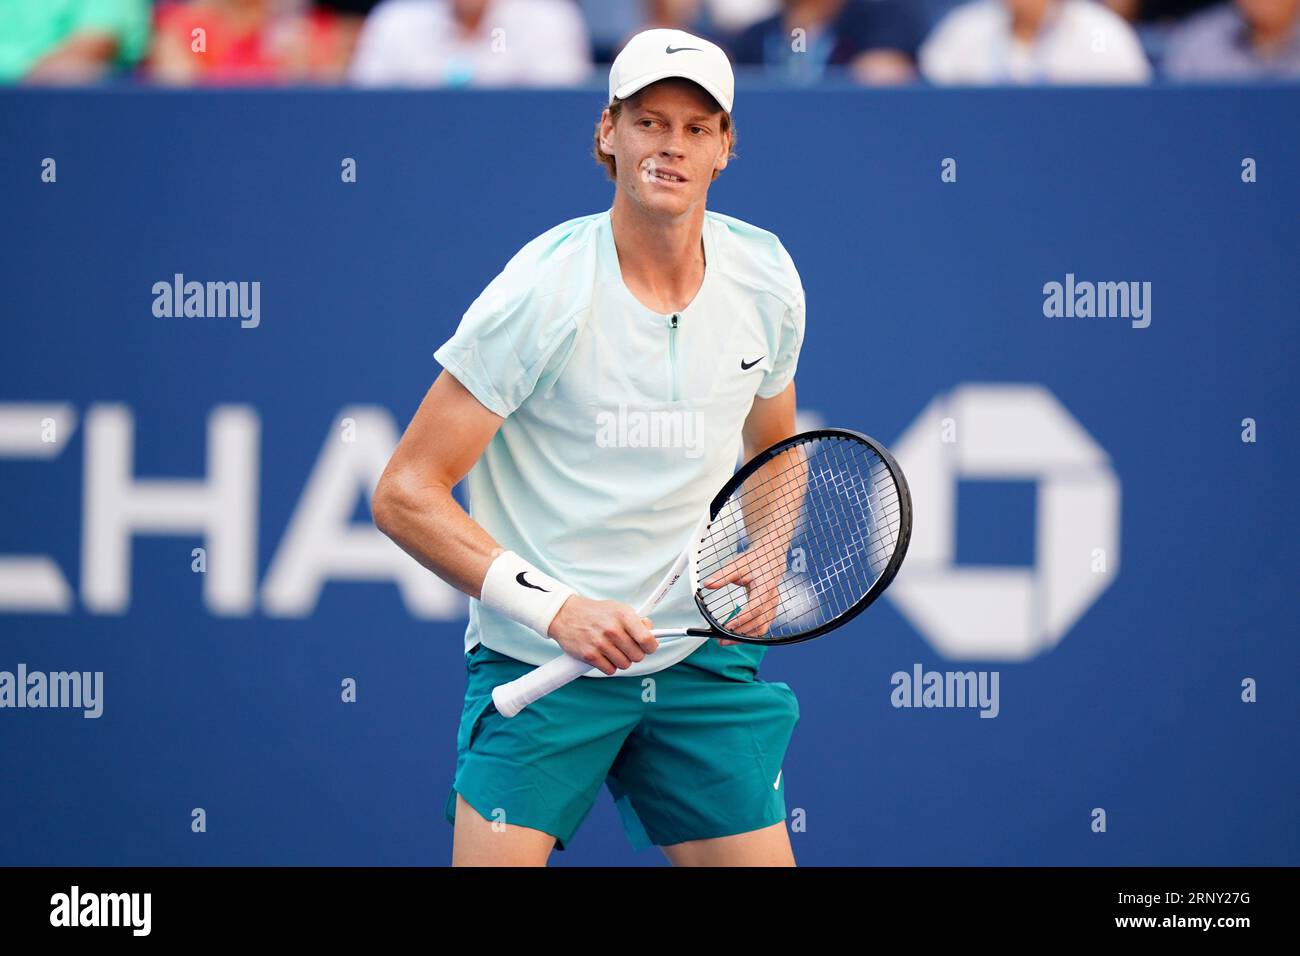 Jannik Sinner in action during a mens singles match at the 2023 US Open, Saturday, Sep